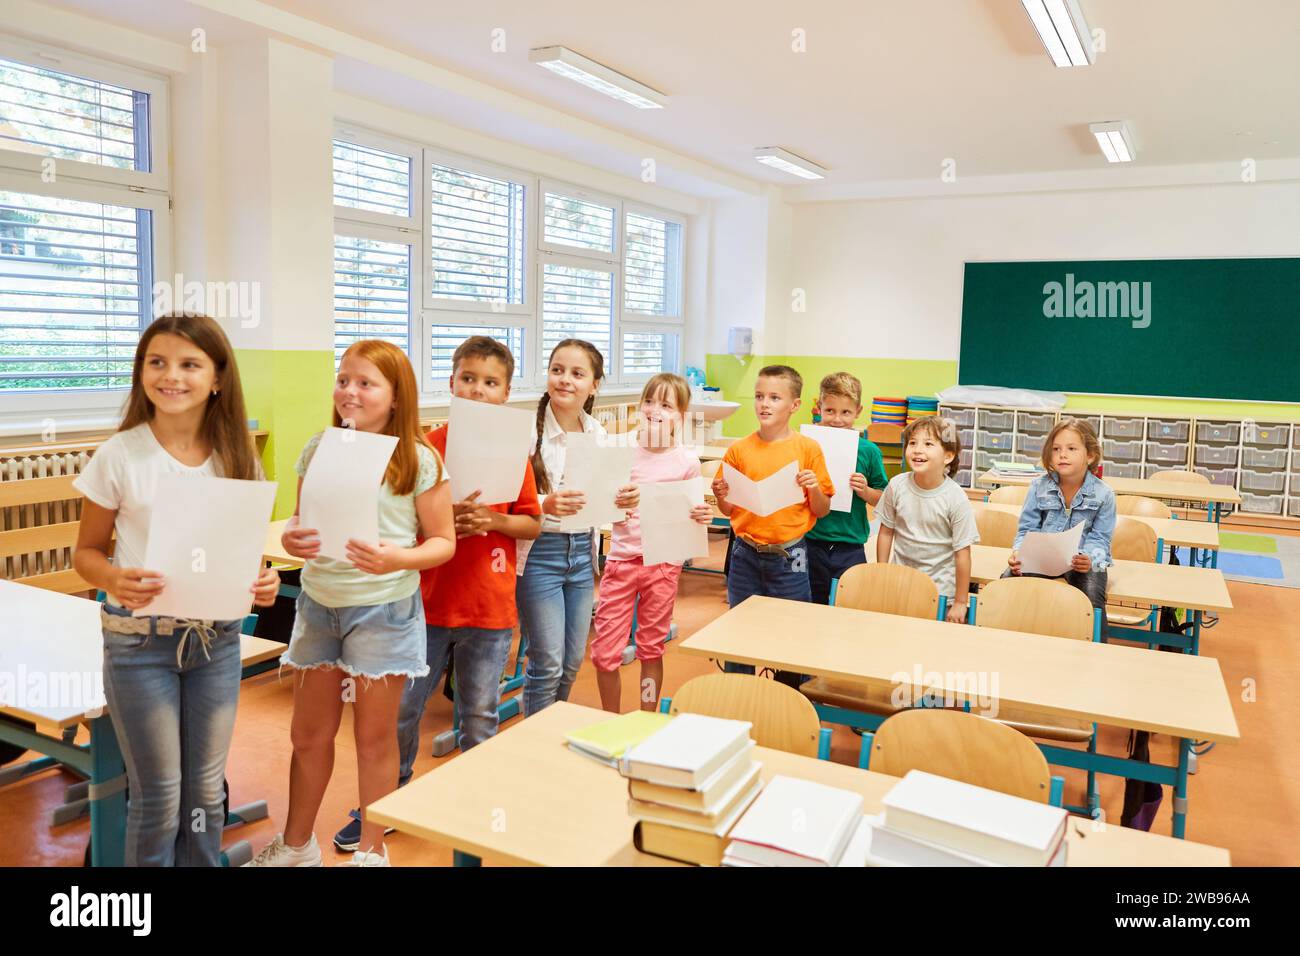 Group of smiling school students standing in row holding paper during activity in classroom Stock Photo